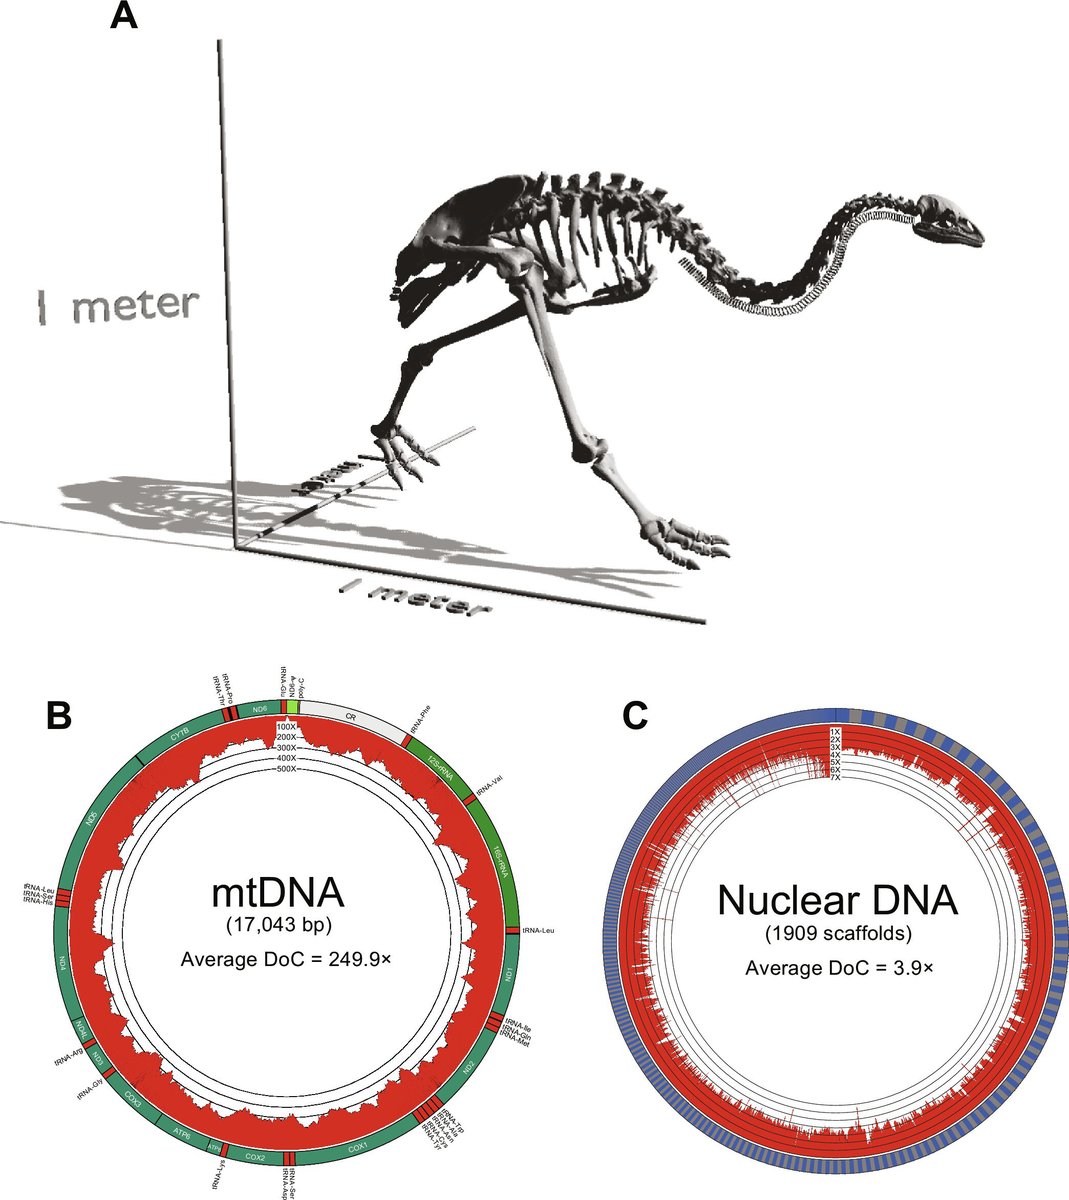 Using ancient DNA recovered from a fossil bone, scientists have reconstructed a complete genome of the little bush moa, an extinct species of flightless bird that once roamed the forested islands of New Zealand. scim.ag/74Y